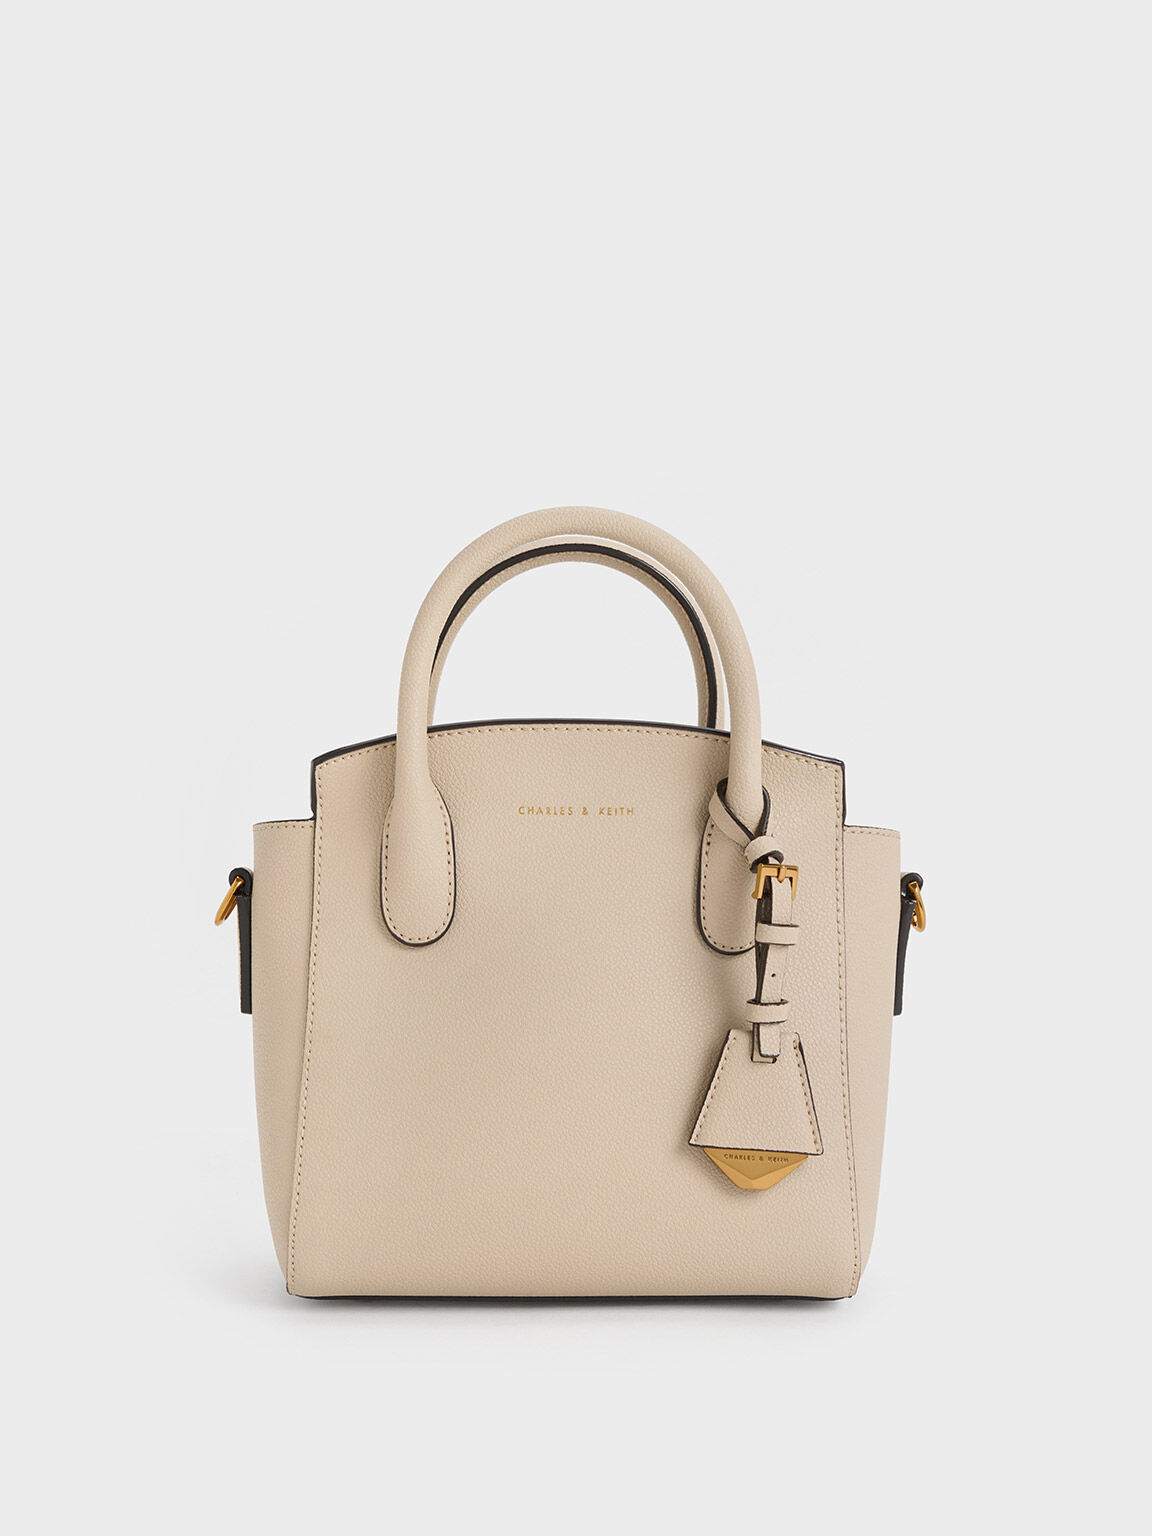 CHARLES & KEITH - Tasteful and refined, this sculptural handle